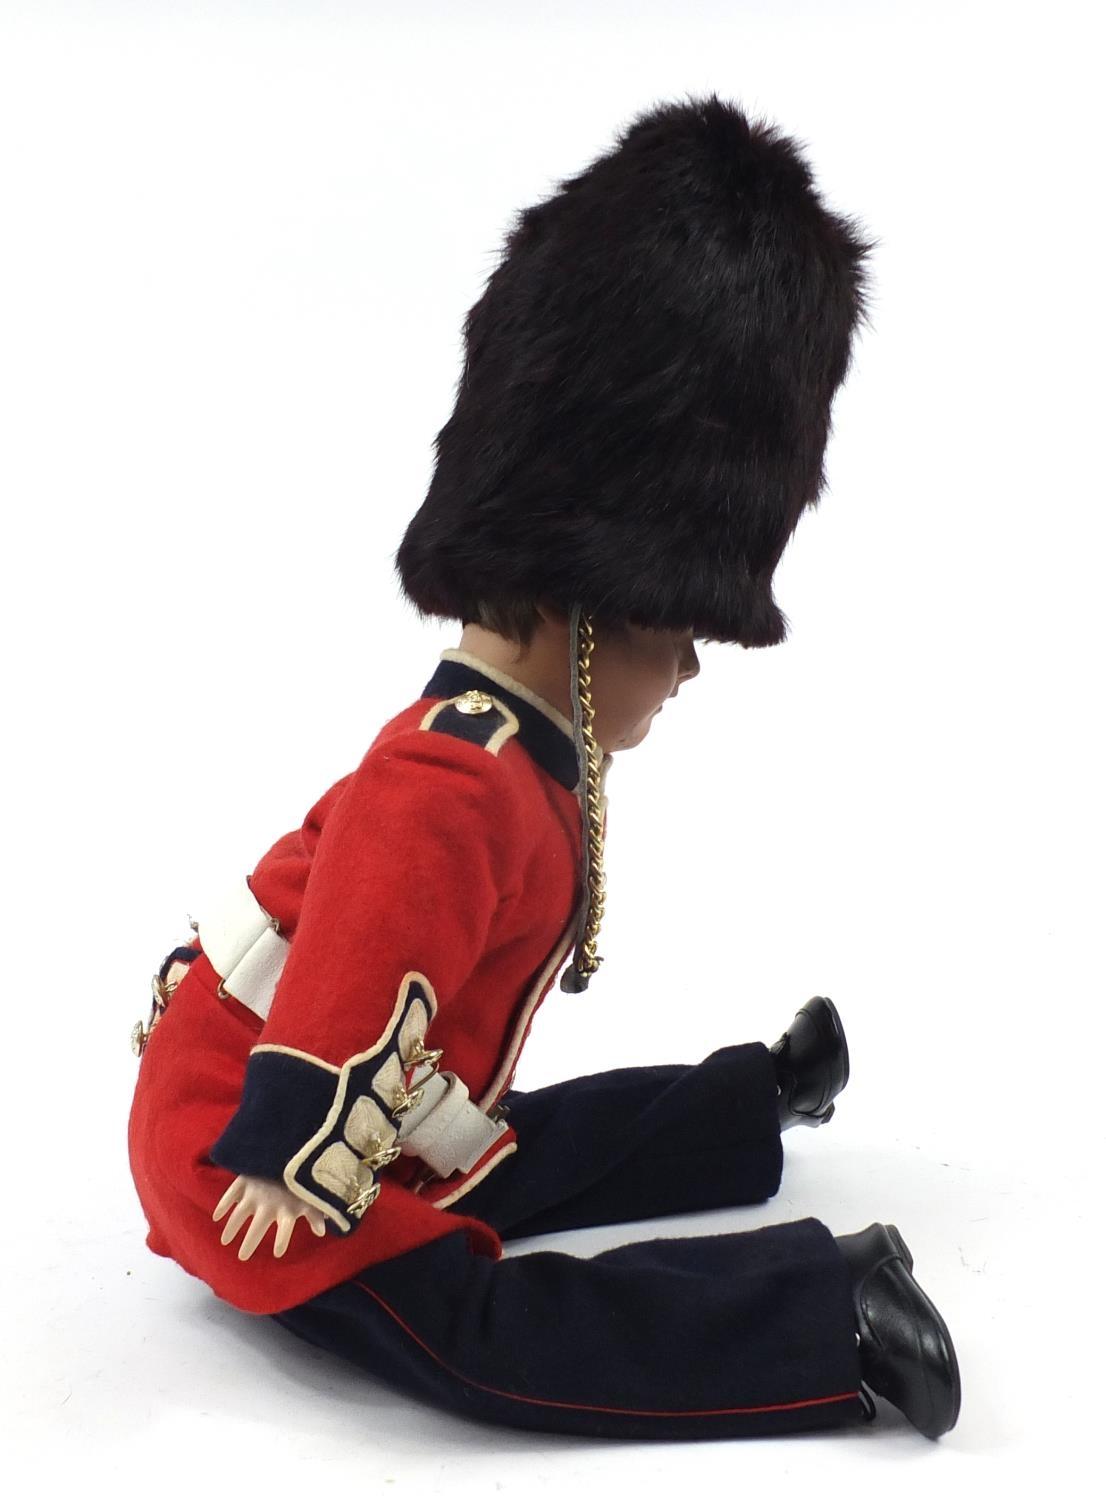 Simon & Halbig bisque headed Beefeater doll, 71cm high - Image 6 of 6